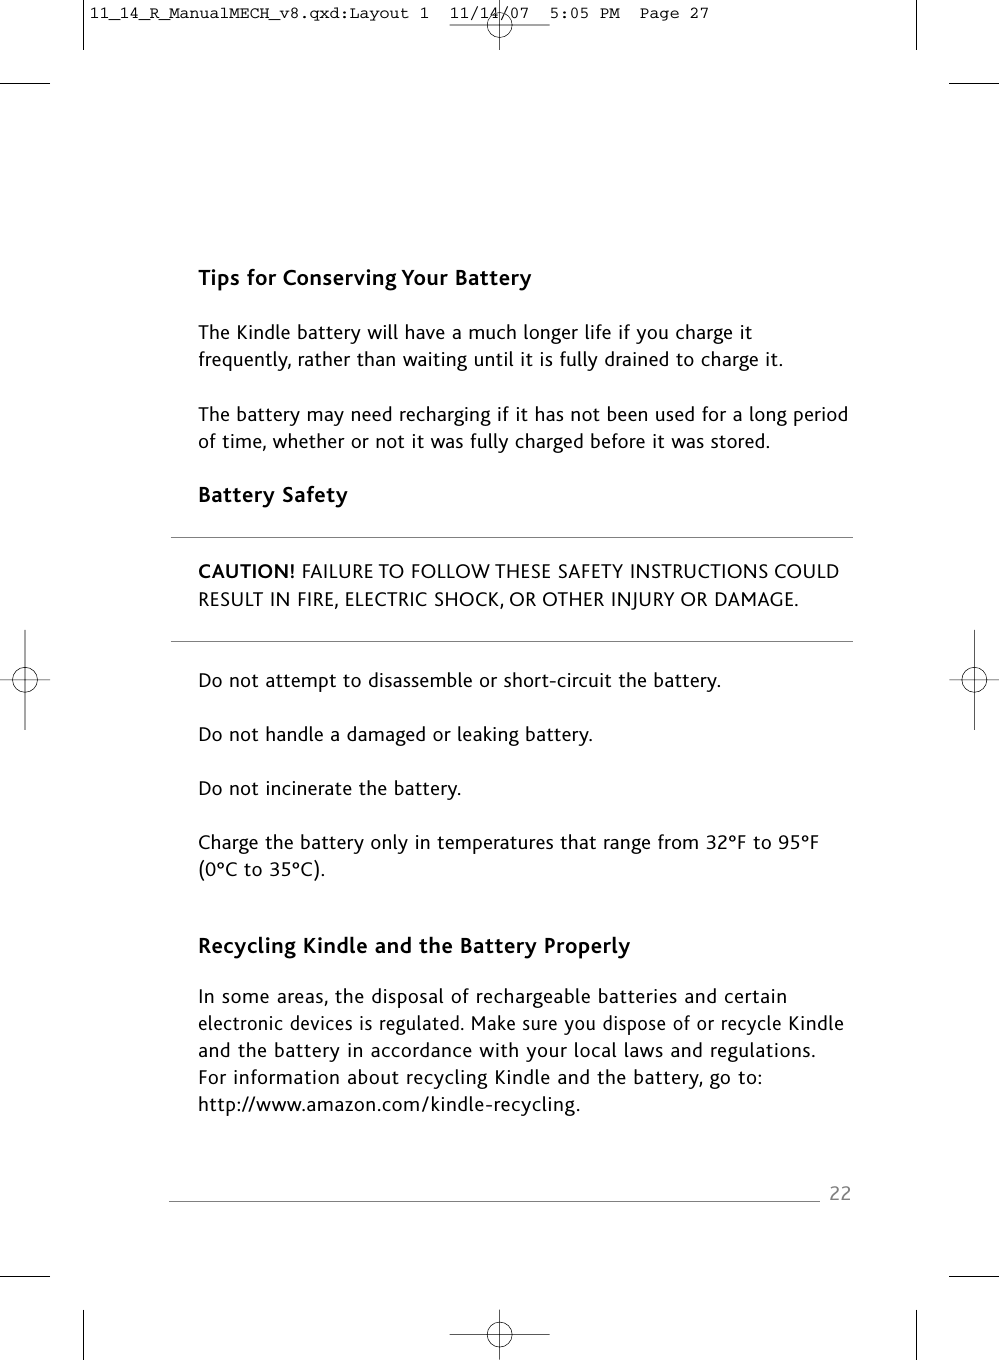 Tips for Conserving Your BatteryThe Kindle battery will have a much longer life if you charge itfrequently, rather than waiting until it is fully drained to charge it.The battery may need recharging if it has not been used for a long period of time, whether or not it was fully charged before it was stored.Battery SafetyCAUTION! FAILURE TO FOLLOW THESE SAFETY INSTRUCTIONS COULD RESULT IN FIRE, ELECTRIC SHOCK, OR OTHER INJURY OR DAMAGE.Do not attempt to disassemble or short-circuit the battery.Do not handle a damaged or leaking battery.Do not incinerate the battery.Charge the battery only in temperatures that range from 32°F to 95°F (0°C to 35°C).Recycling Kindle and the Battery ProperlyIn some areas, the disposal of rechargeable batteries and certain electronic devices is regulated. Make sure you dispose of or recycle Kindle and the battery in accordance with your local laws and regulations. For information about recycling Kindle and the battery, go to: http://www.amazon.com/kindle-recycling.2211_14_R_ManualMECH_v8.qxd:Layout 1  11/14/07  5:05 PM  Page 27